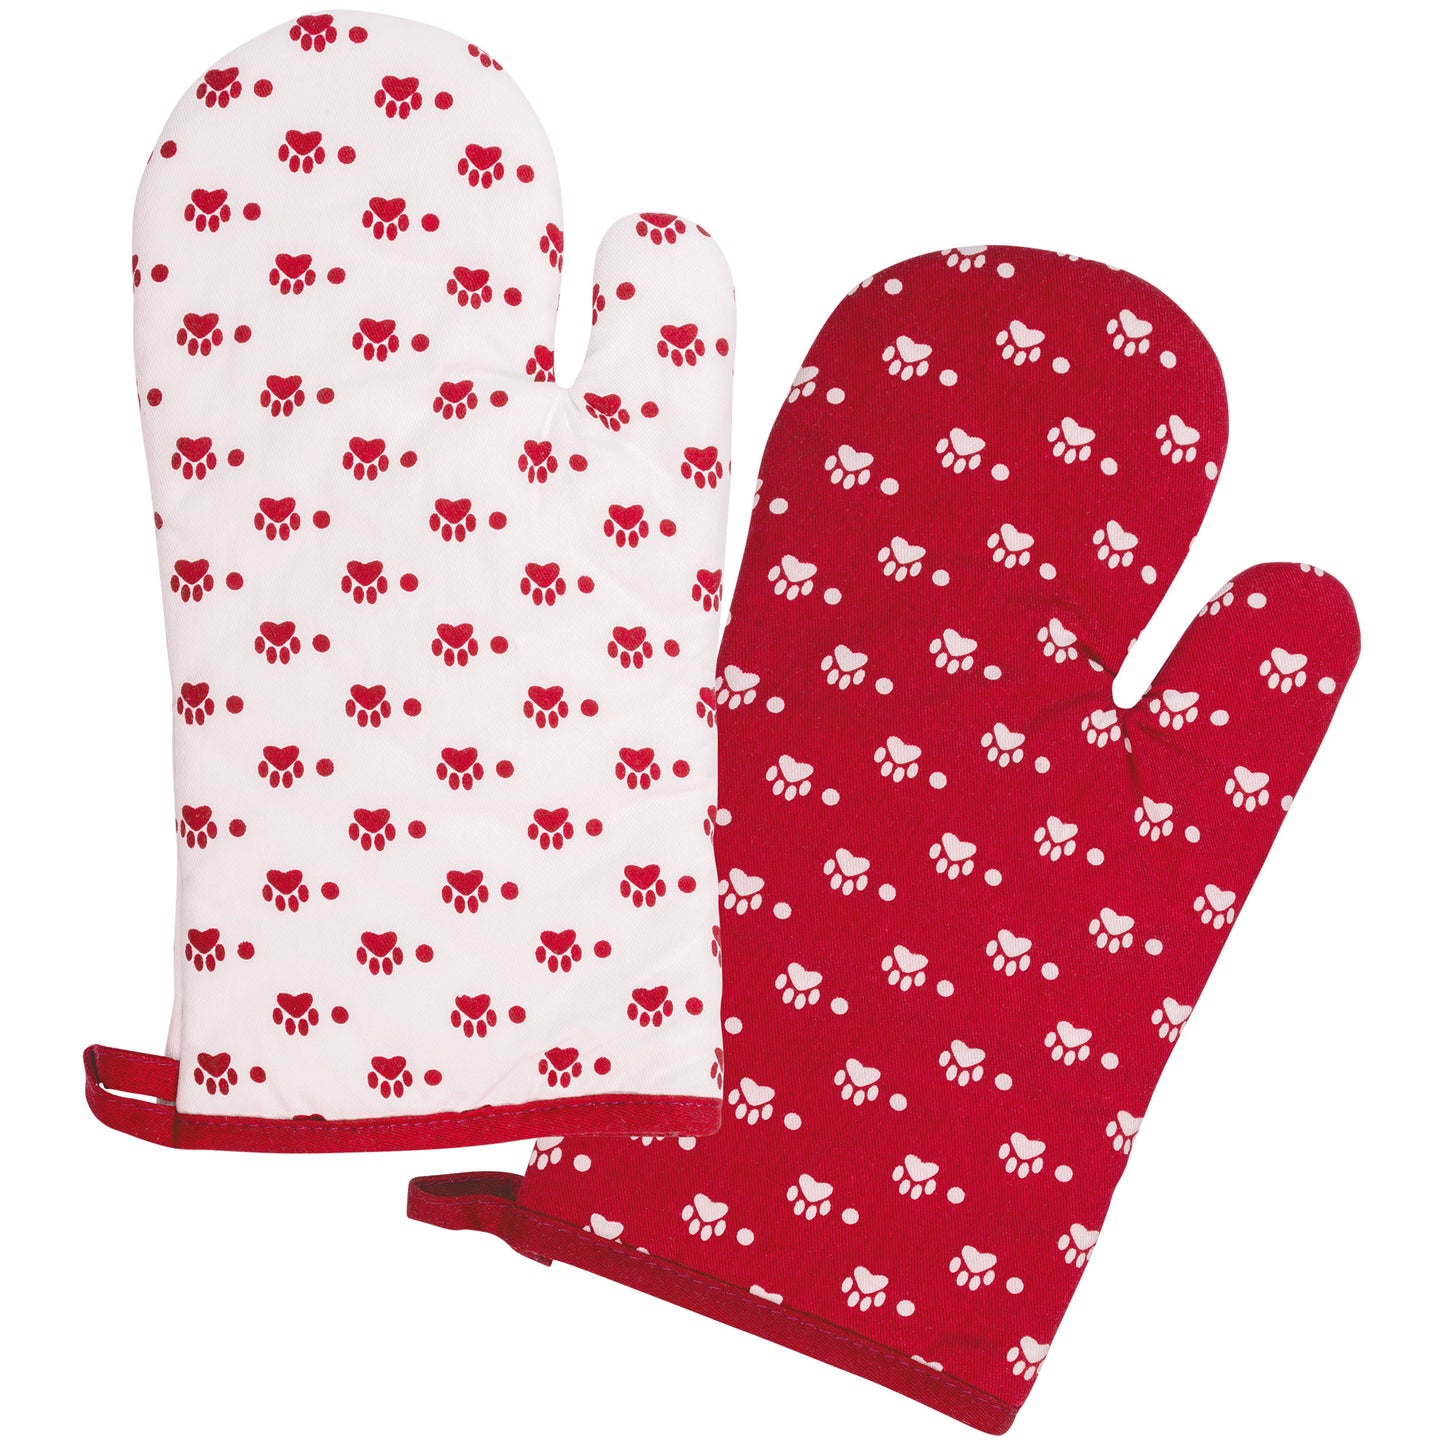 Pets & Paws Oven Mitts - Set of 2